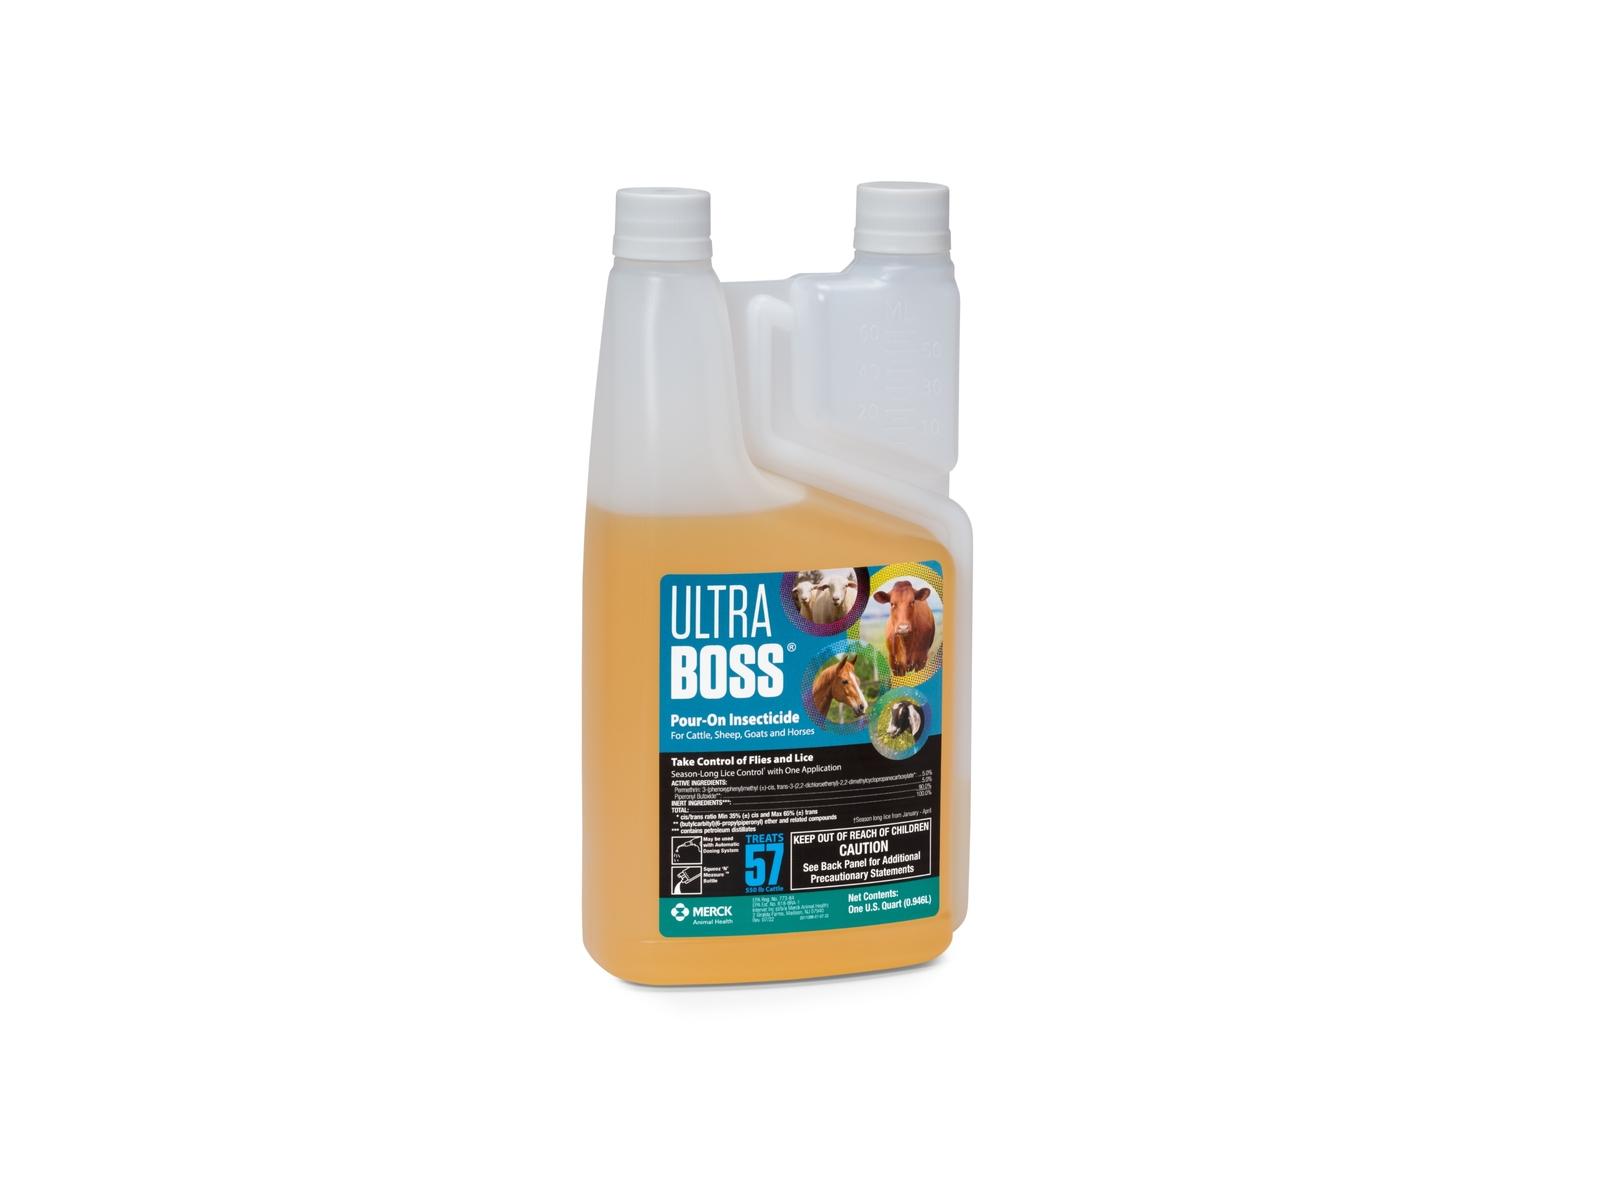 Merck Ultra Boss Pour-On Insecticide